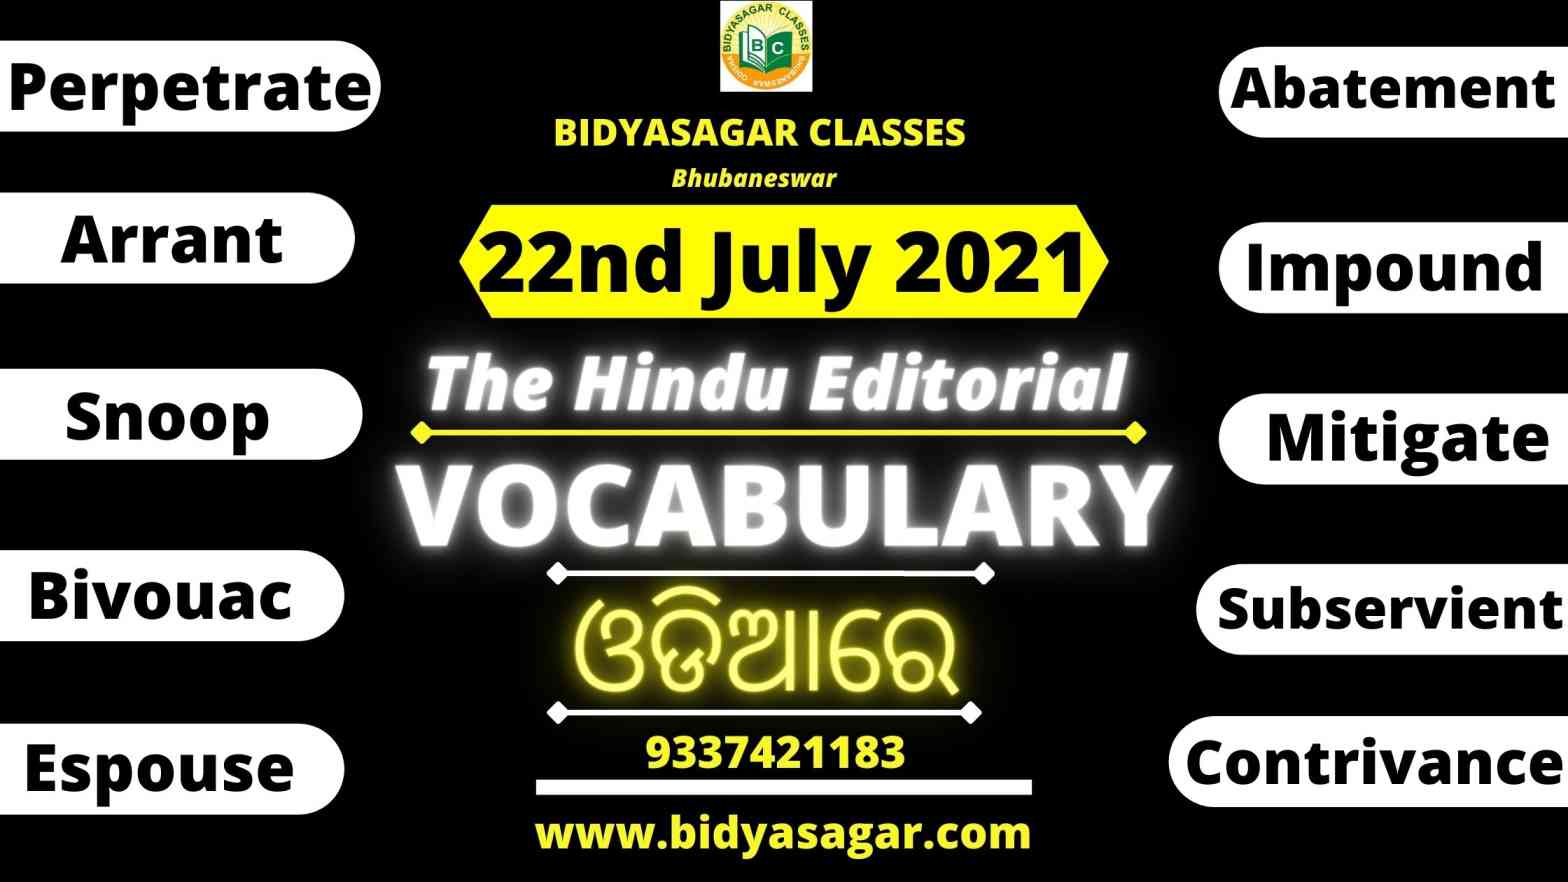 The Hindu Editorial Vocabulary of 22nd July 2021